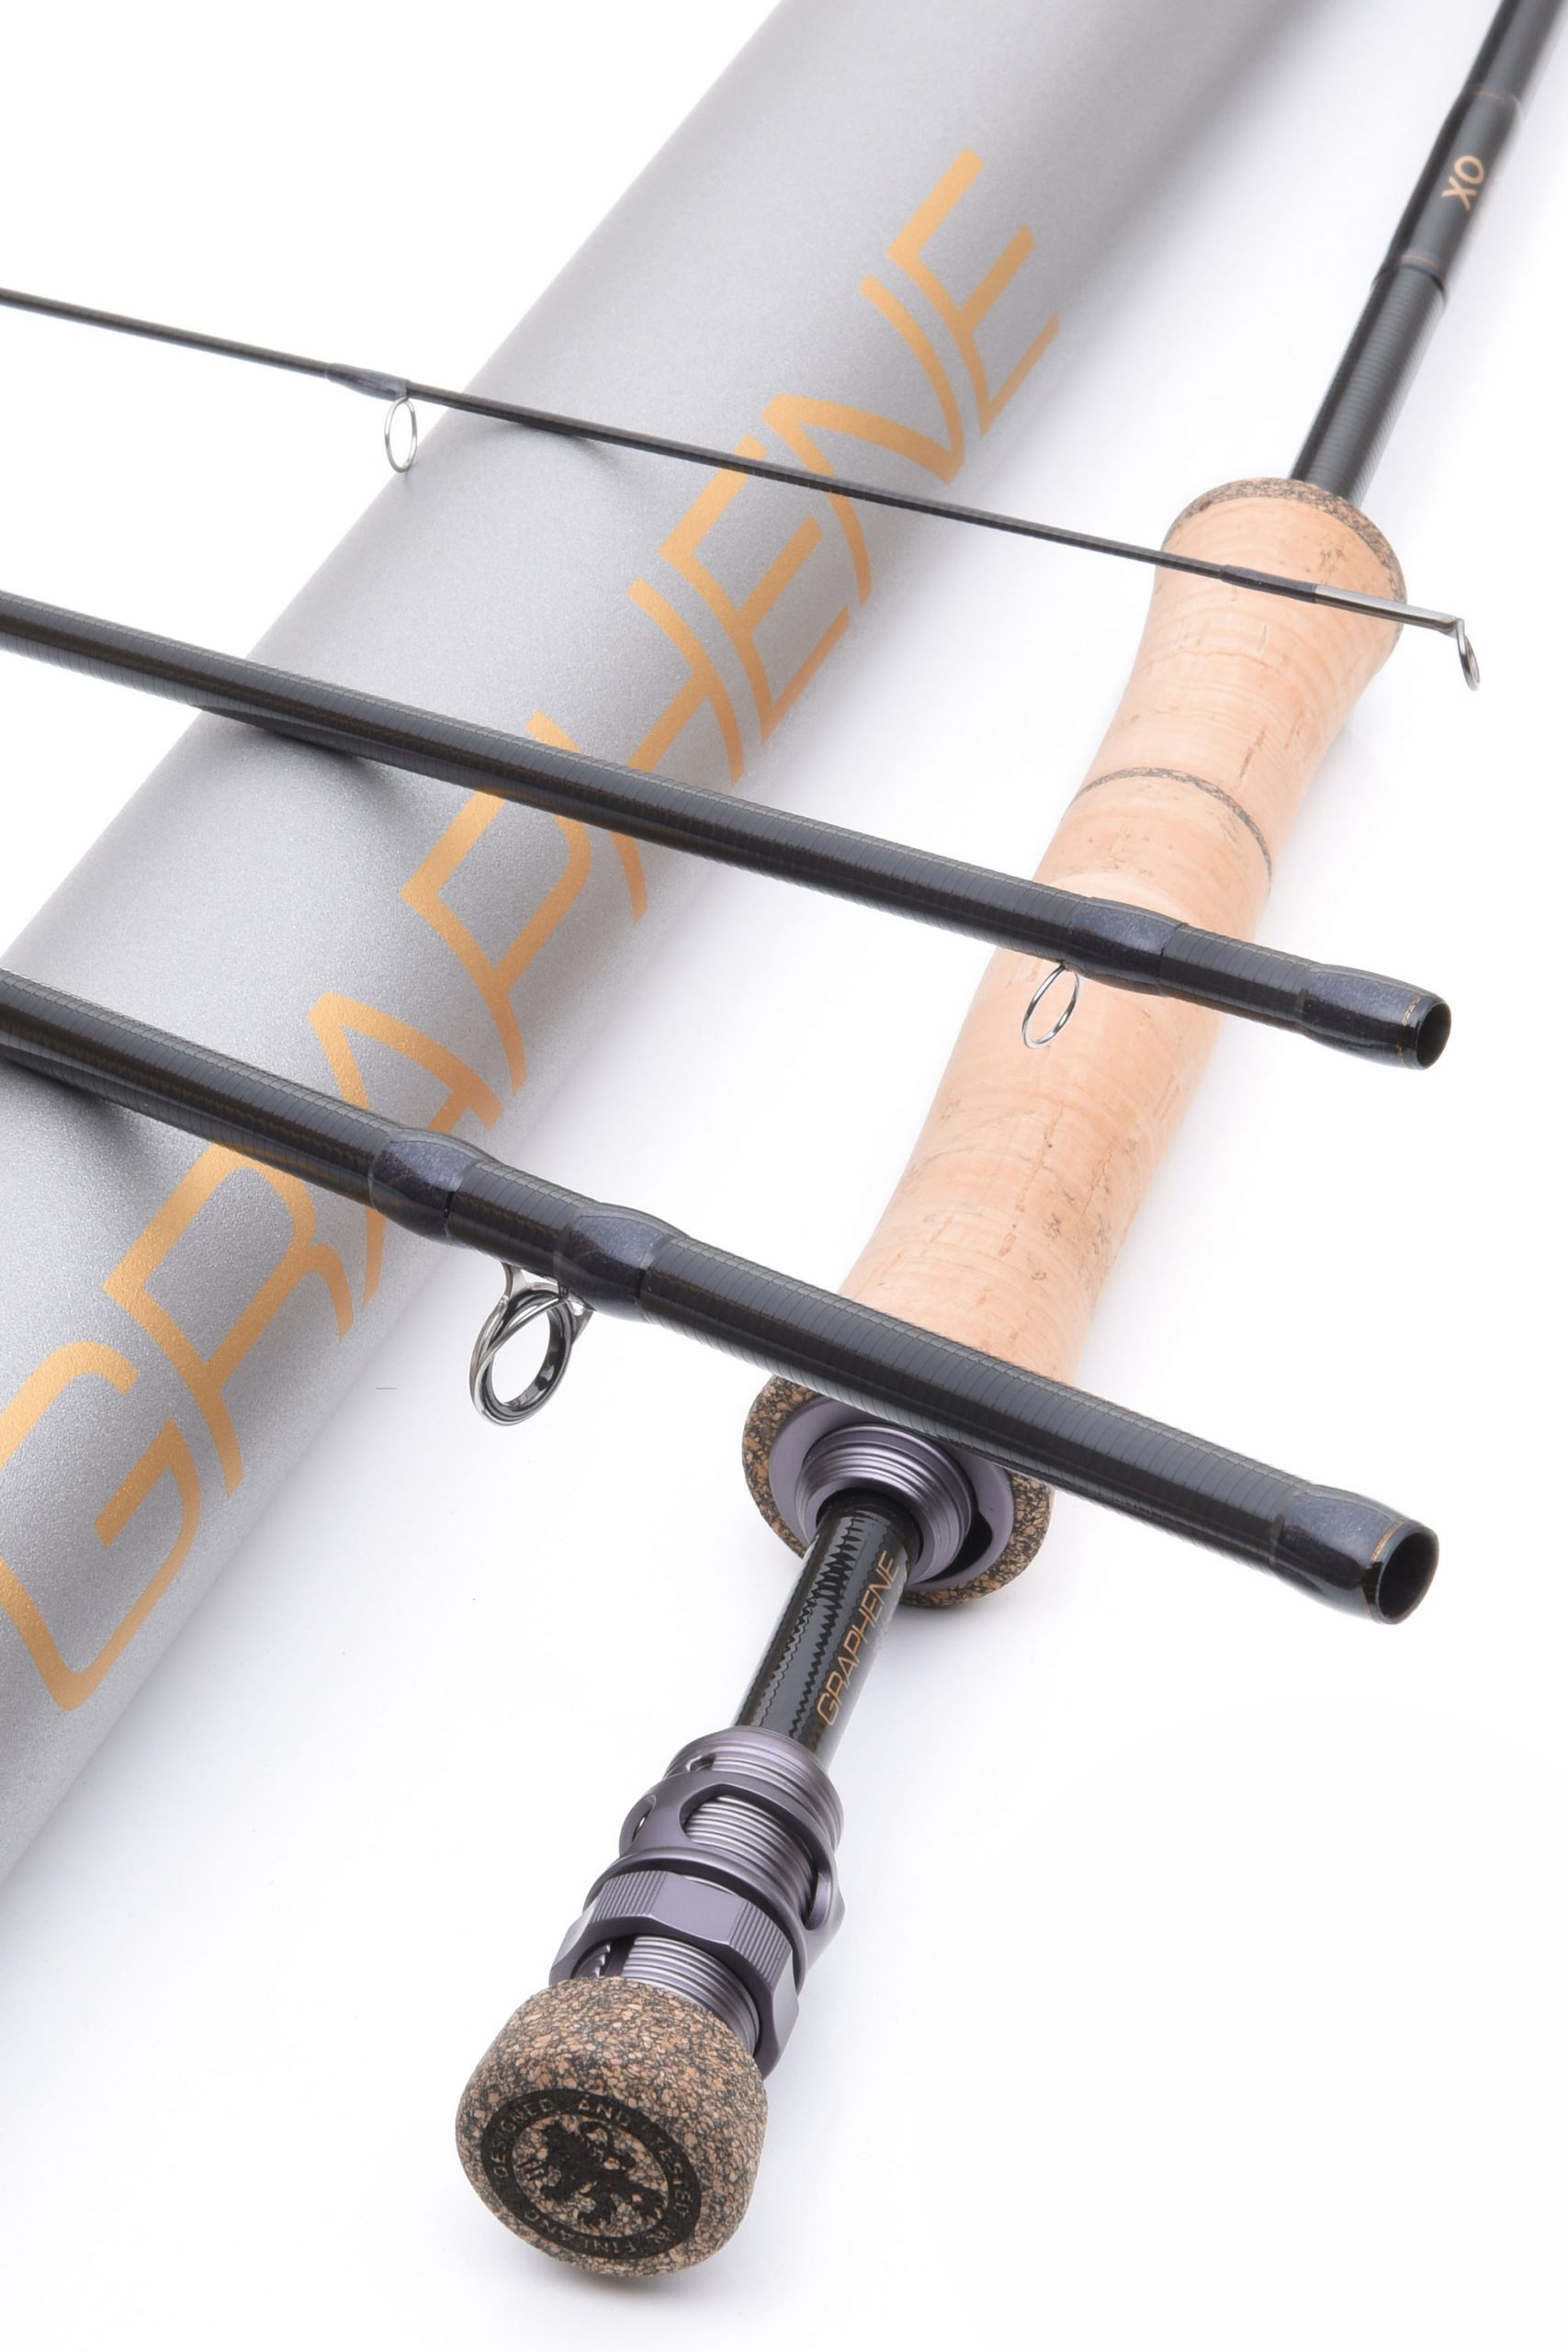 Vision Xo Graphene Fly Rod 10 Foot 3 #3 For Fly Fishing